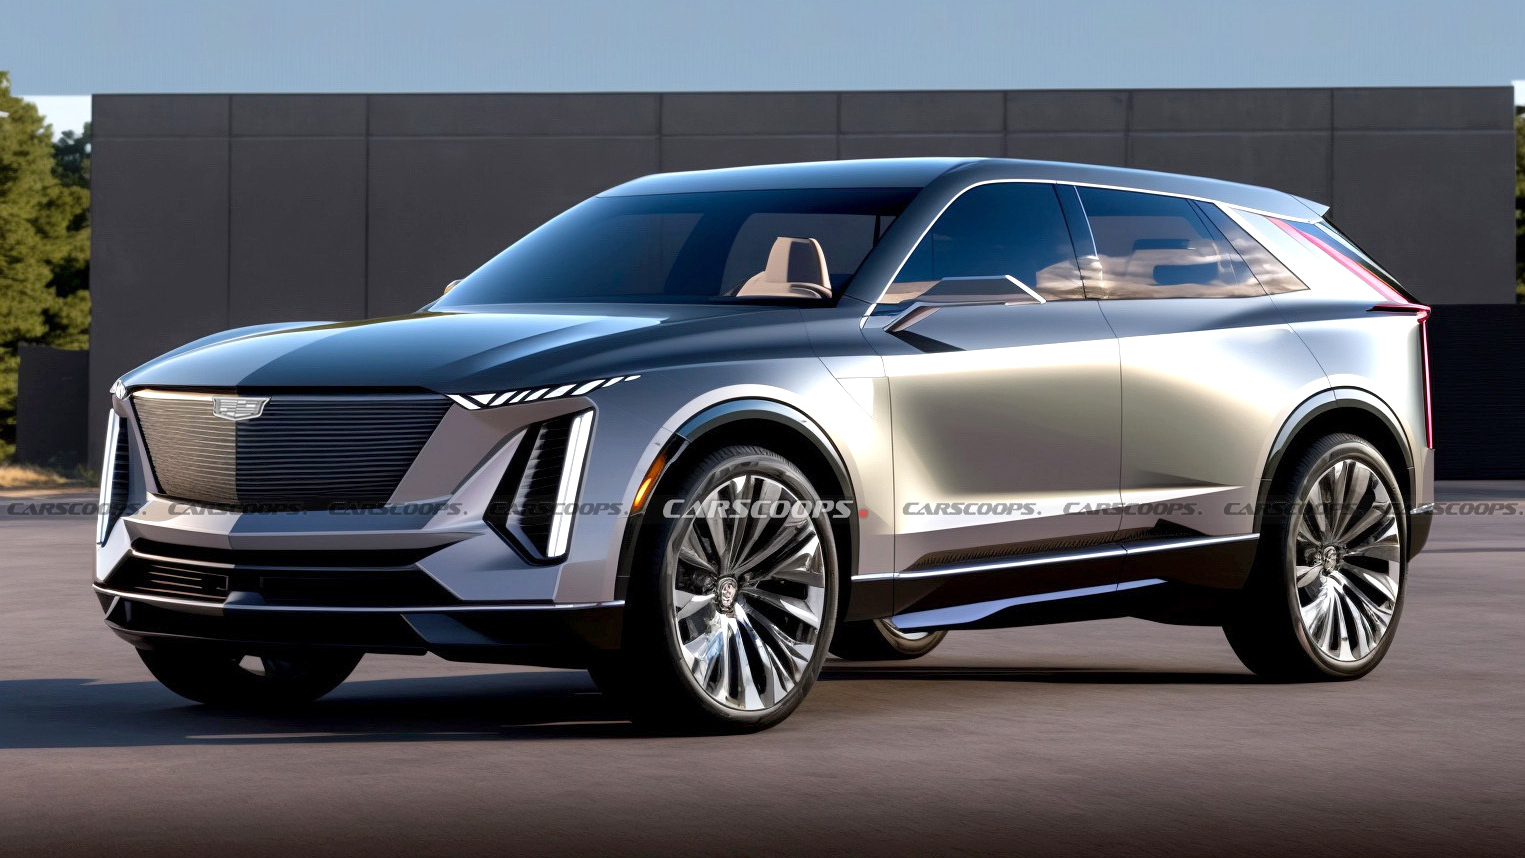 Cadillac To Debut 3 New EVs This Year, One Could Be Entry-Level SUV |  Carscoops